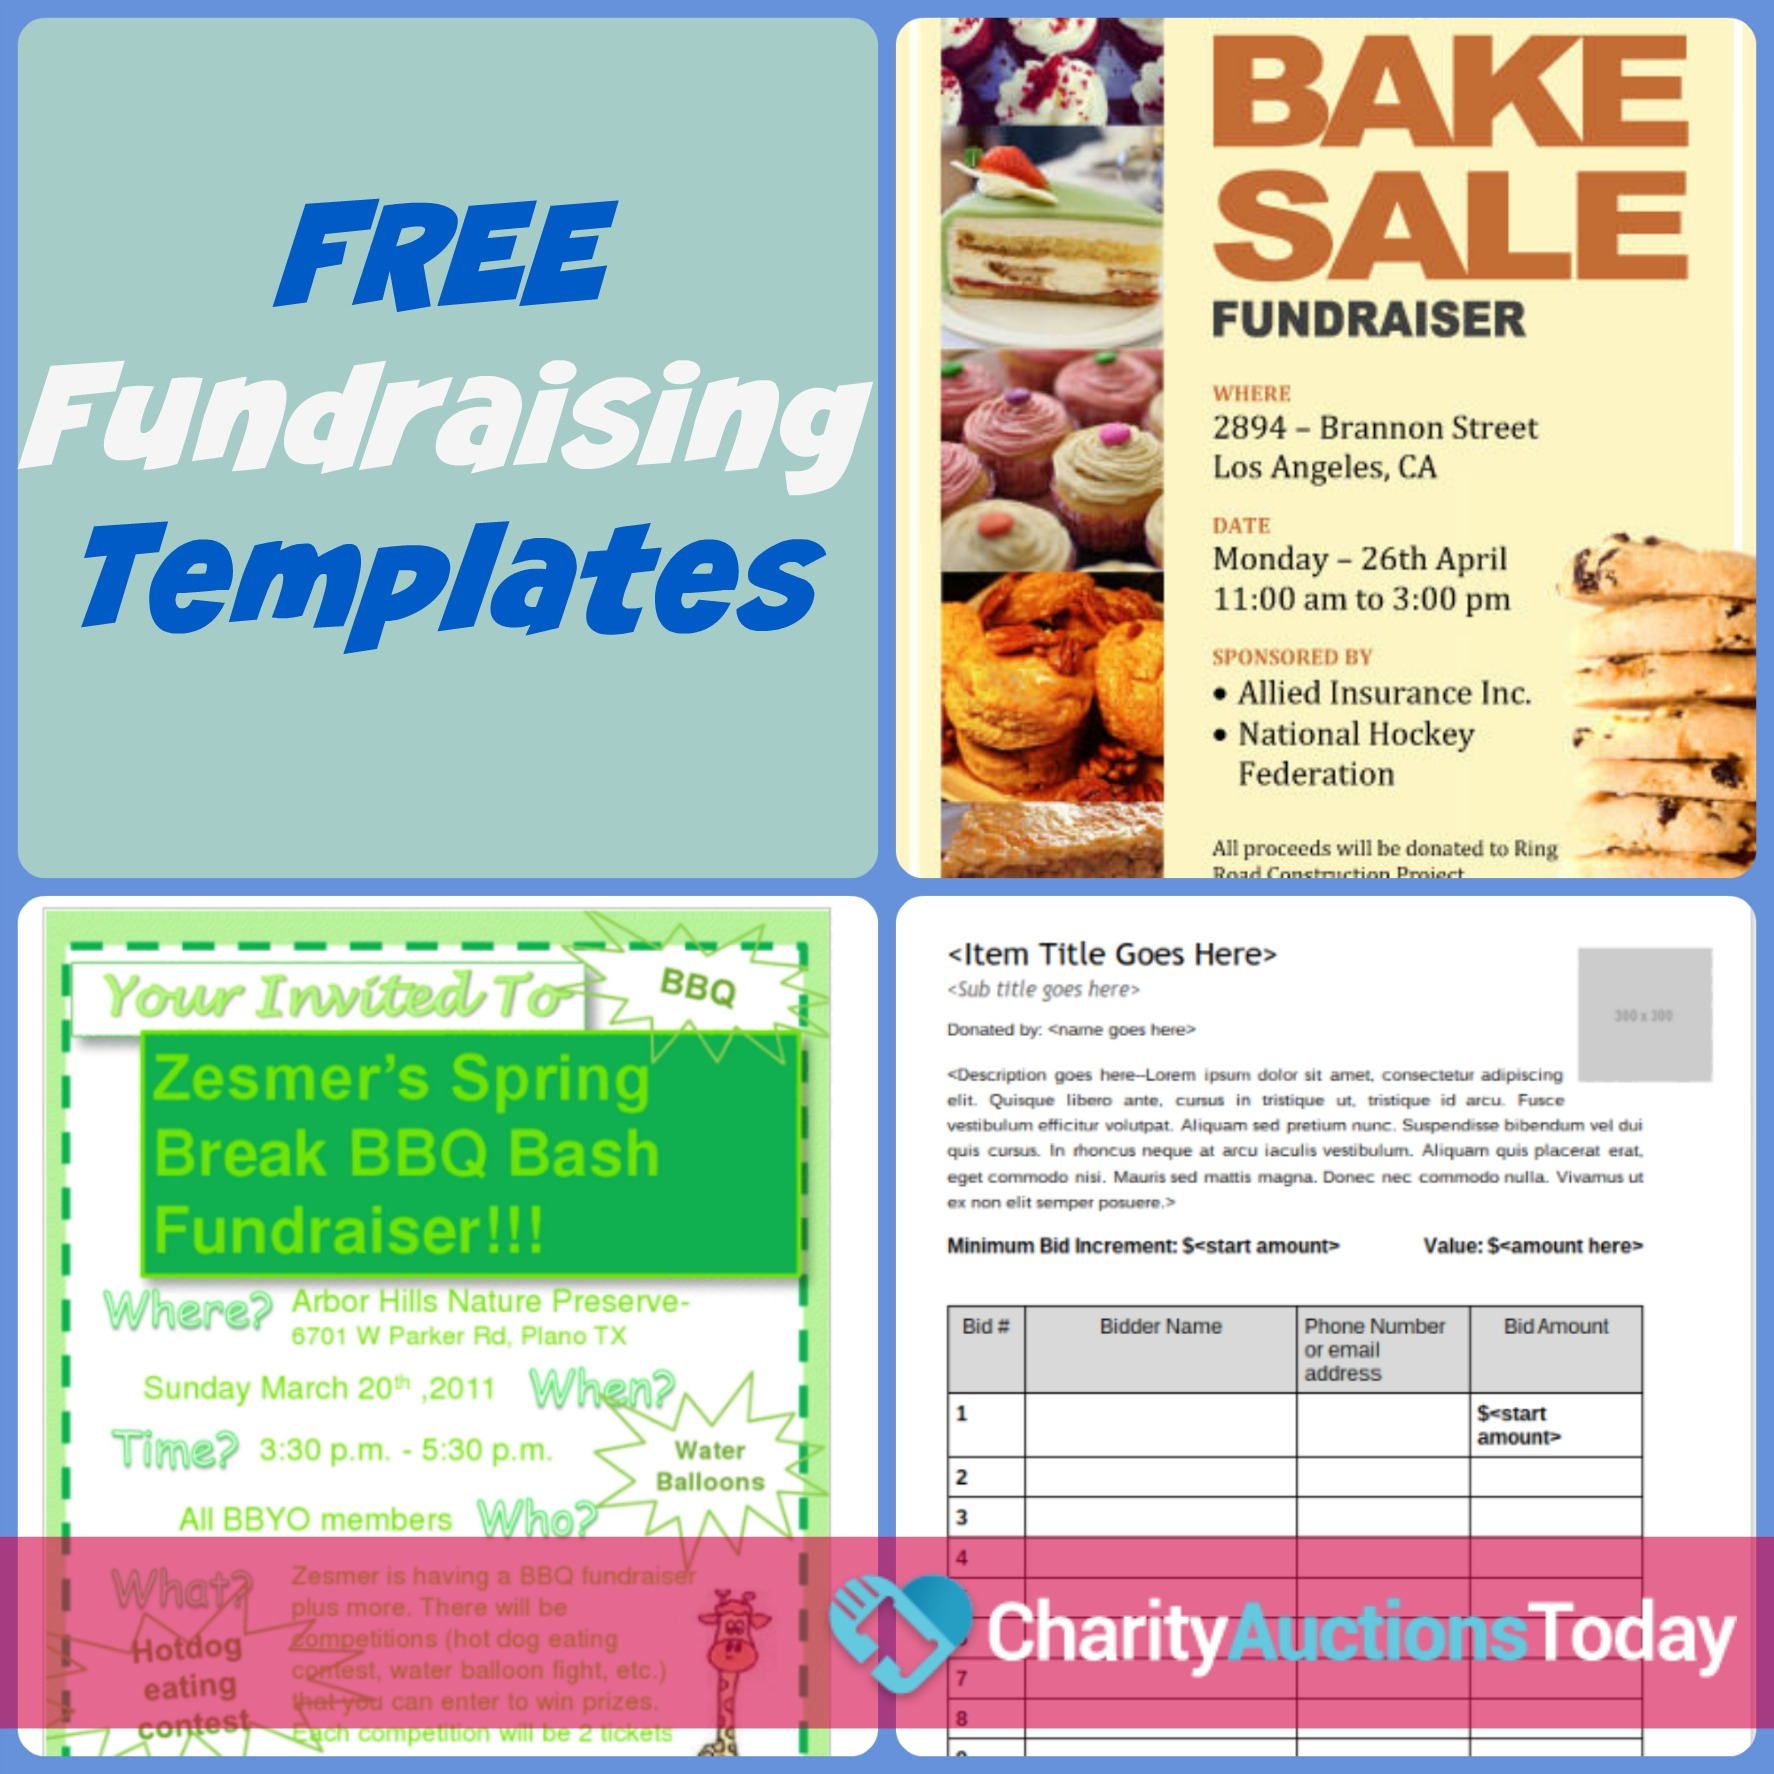 Free Fundraiser Flyer | Charity Auctions Today - Free Printable Event Flyer Templates